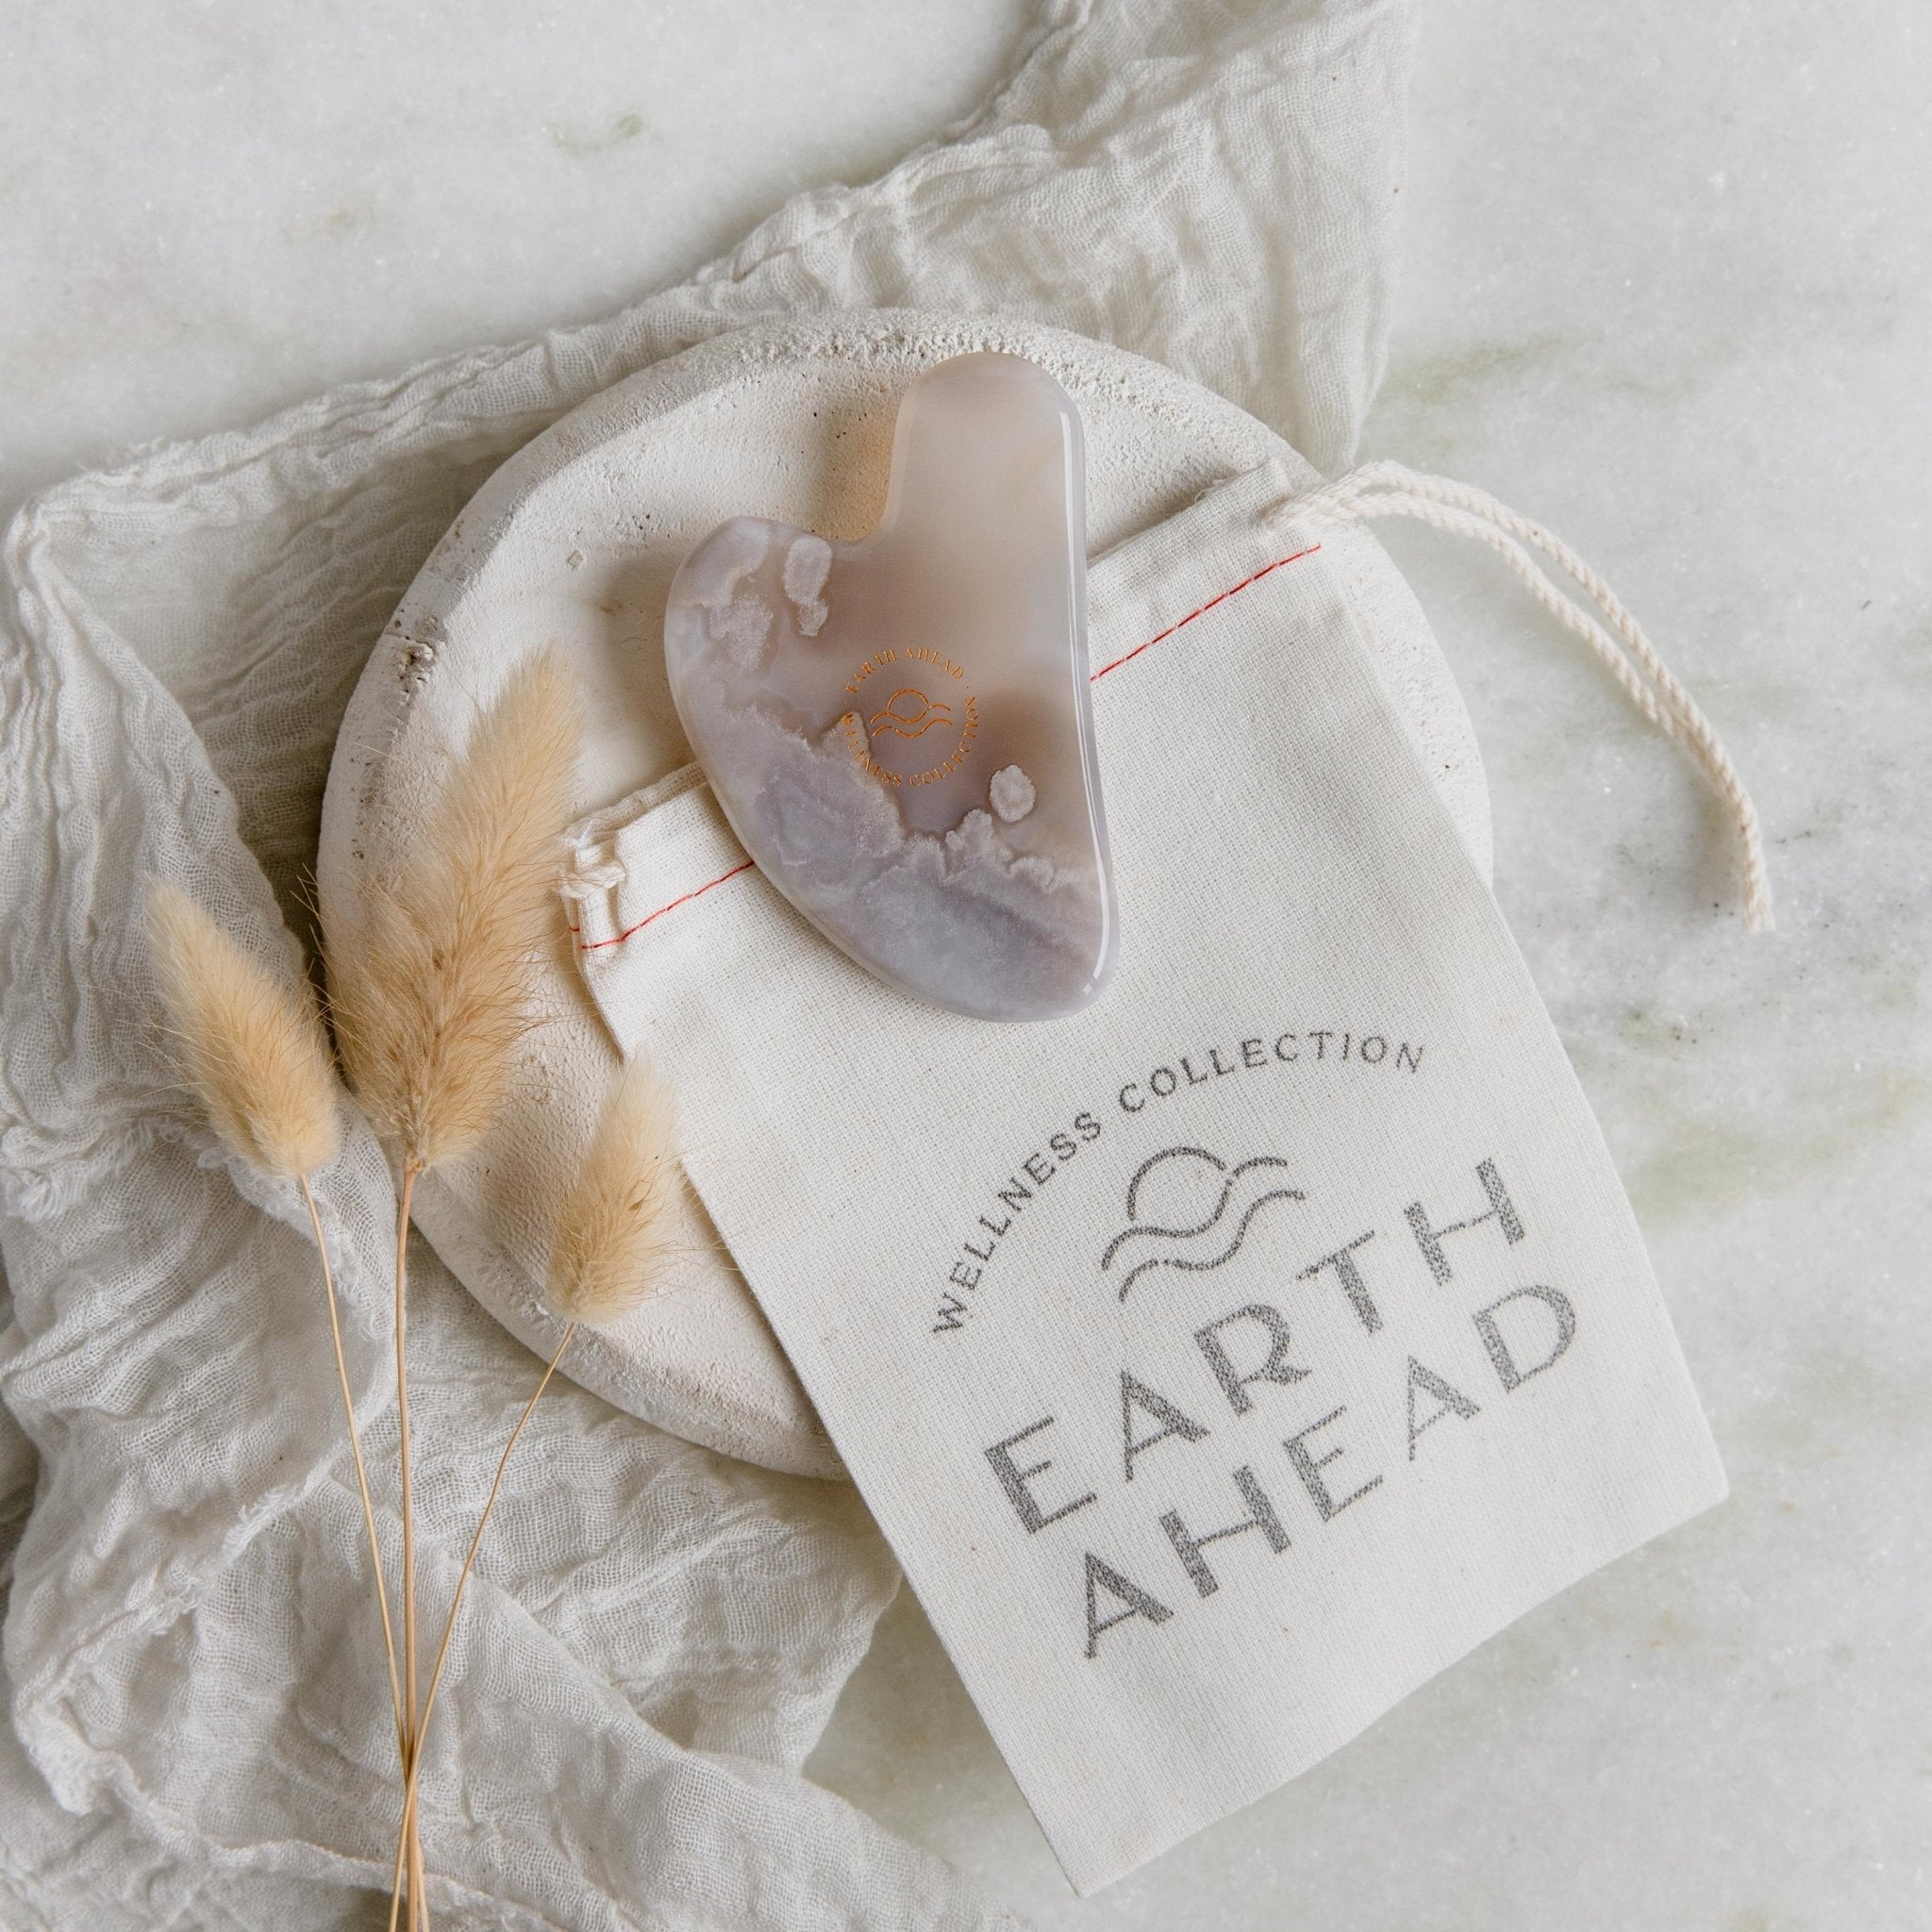 Natural crystal Gaia Grey Agate Gua Sha Facial Massage Tool on top of Wellness Collection cotton pouch - Earth Ahead